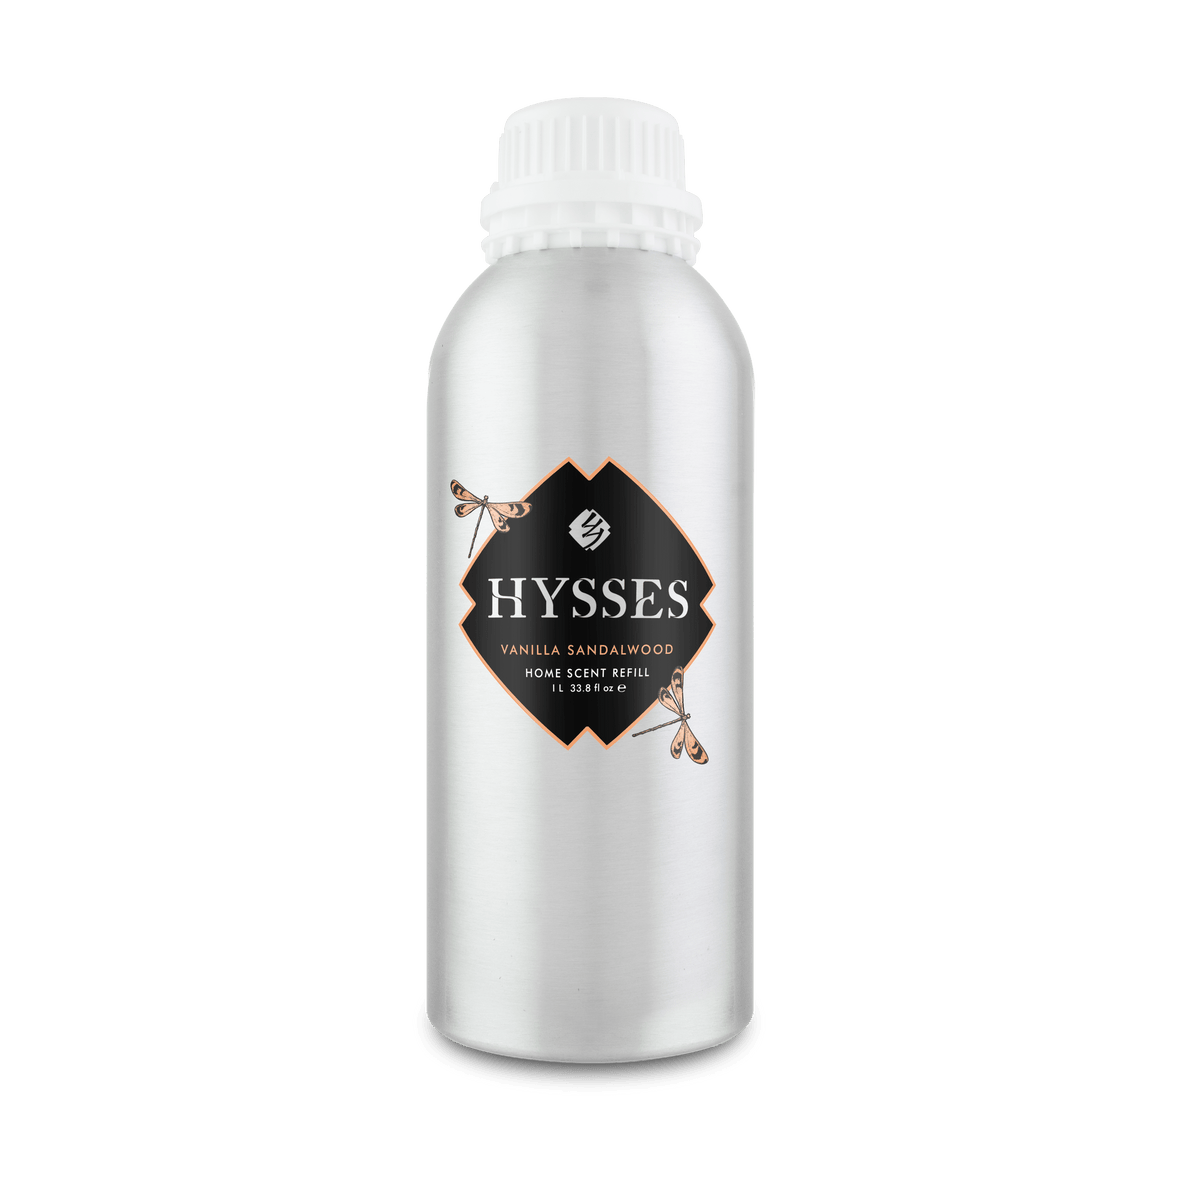 Hysses Home Scents 1000ml Refill Home Scent Vanilla Sandalwood